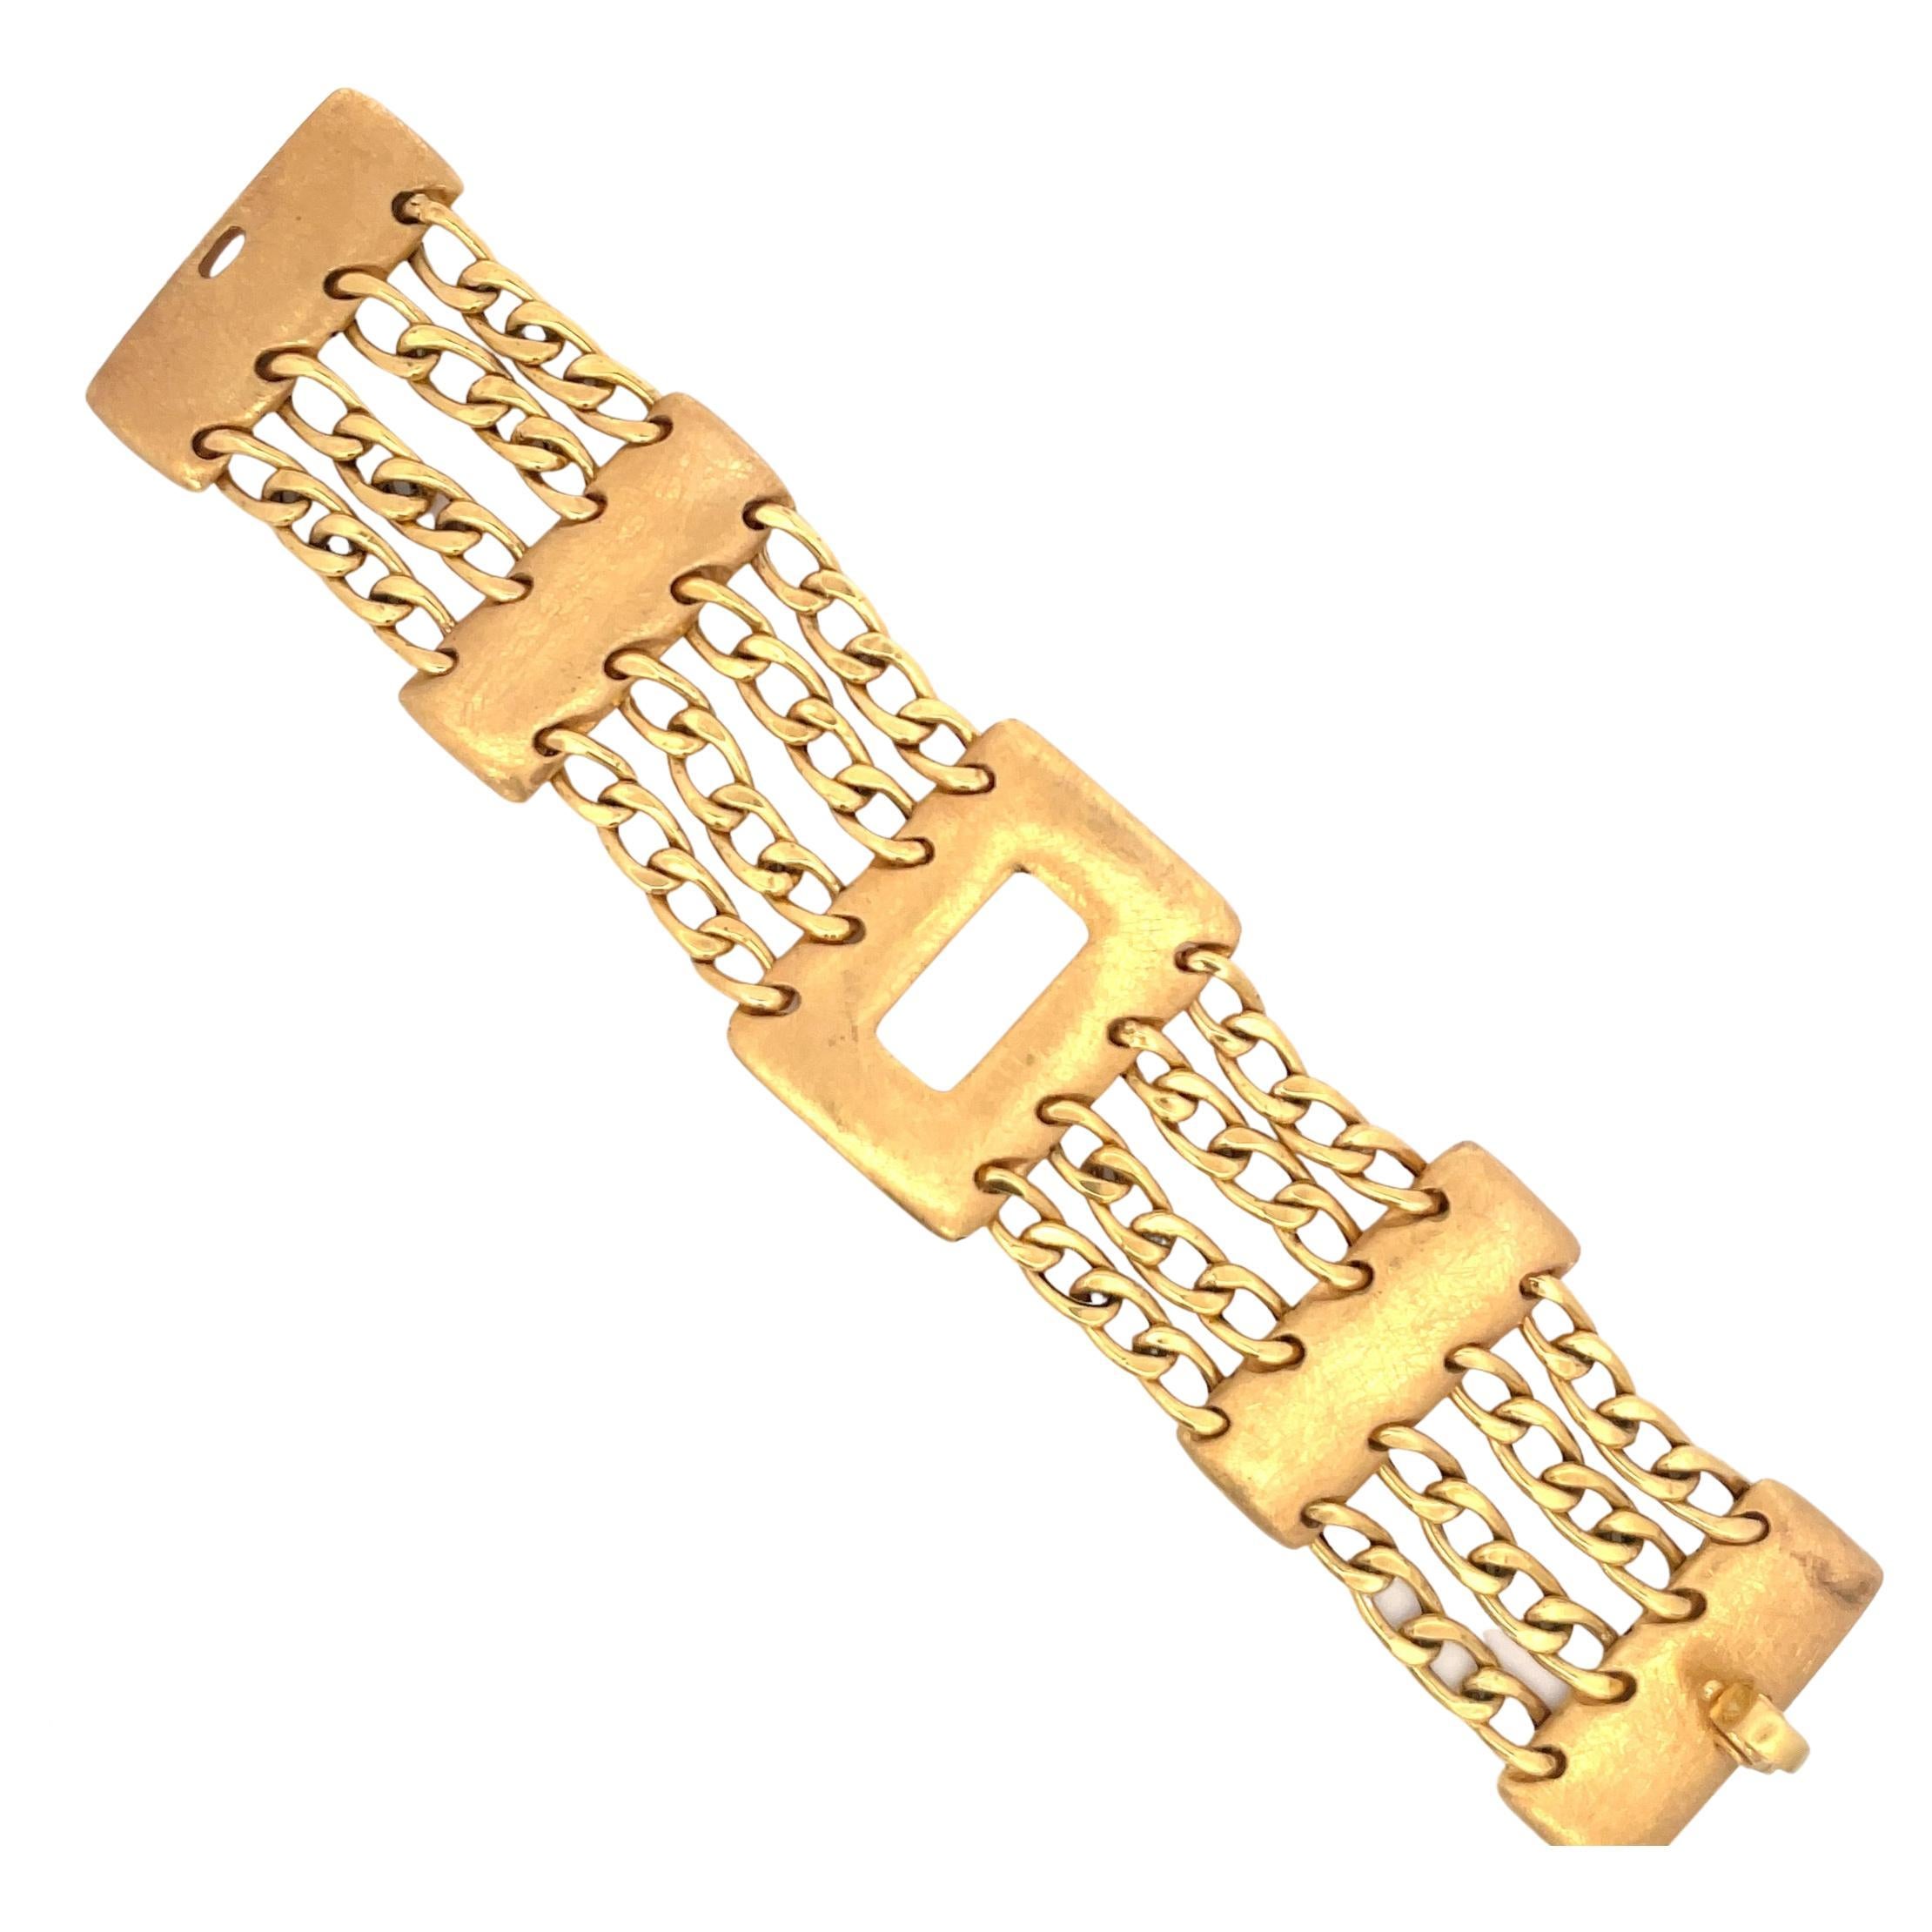 Wide link bracelet featuring four rows of Cuban links separated with brushed bars weighing 33.9 grams. 
More links available
Search Harbor Diamonds
